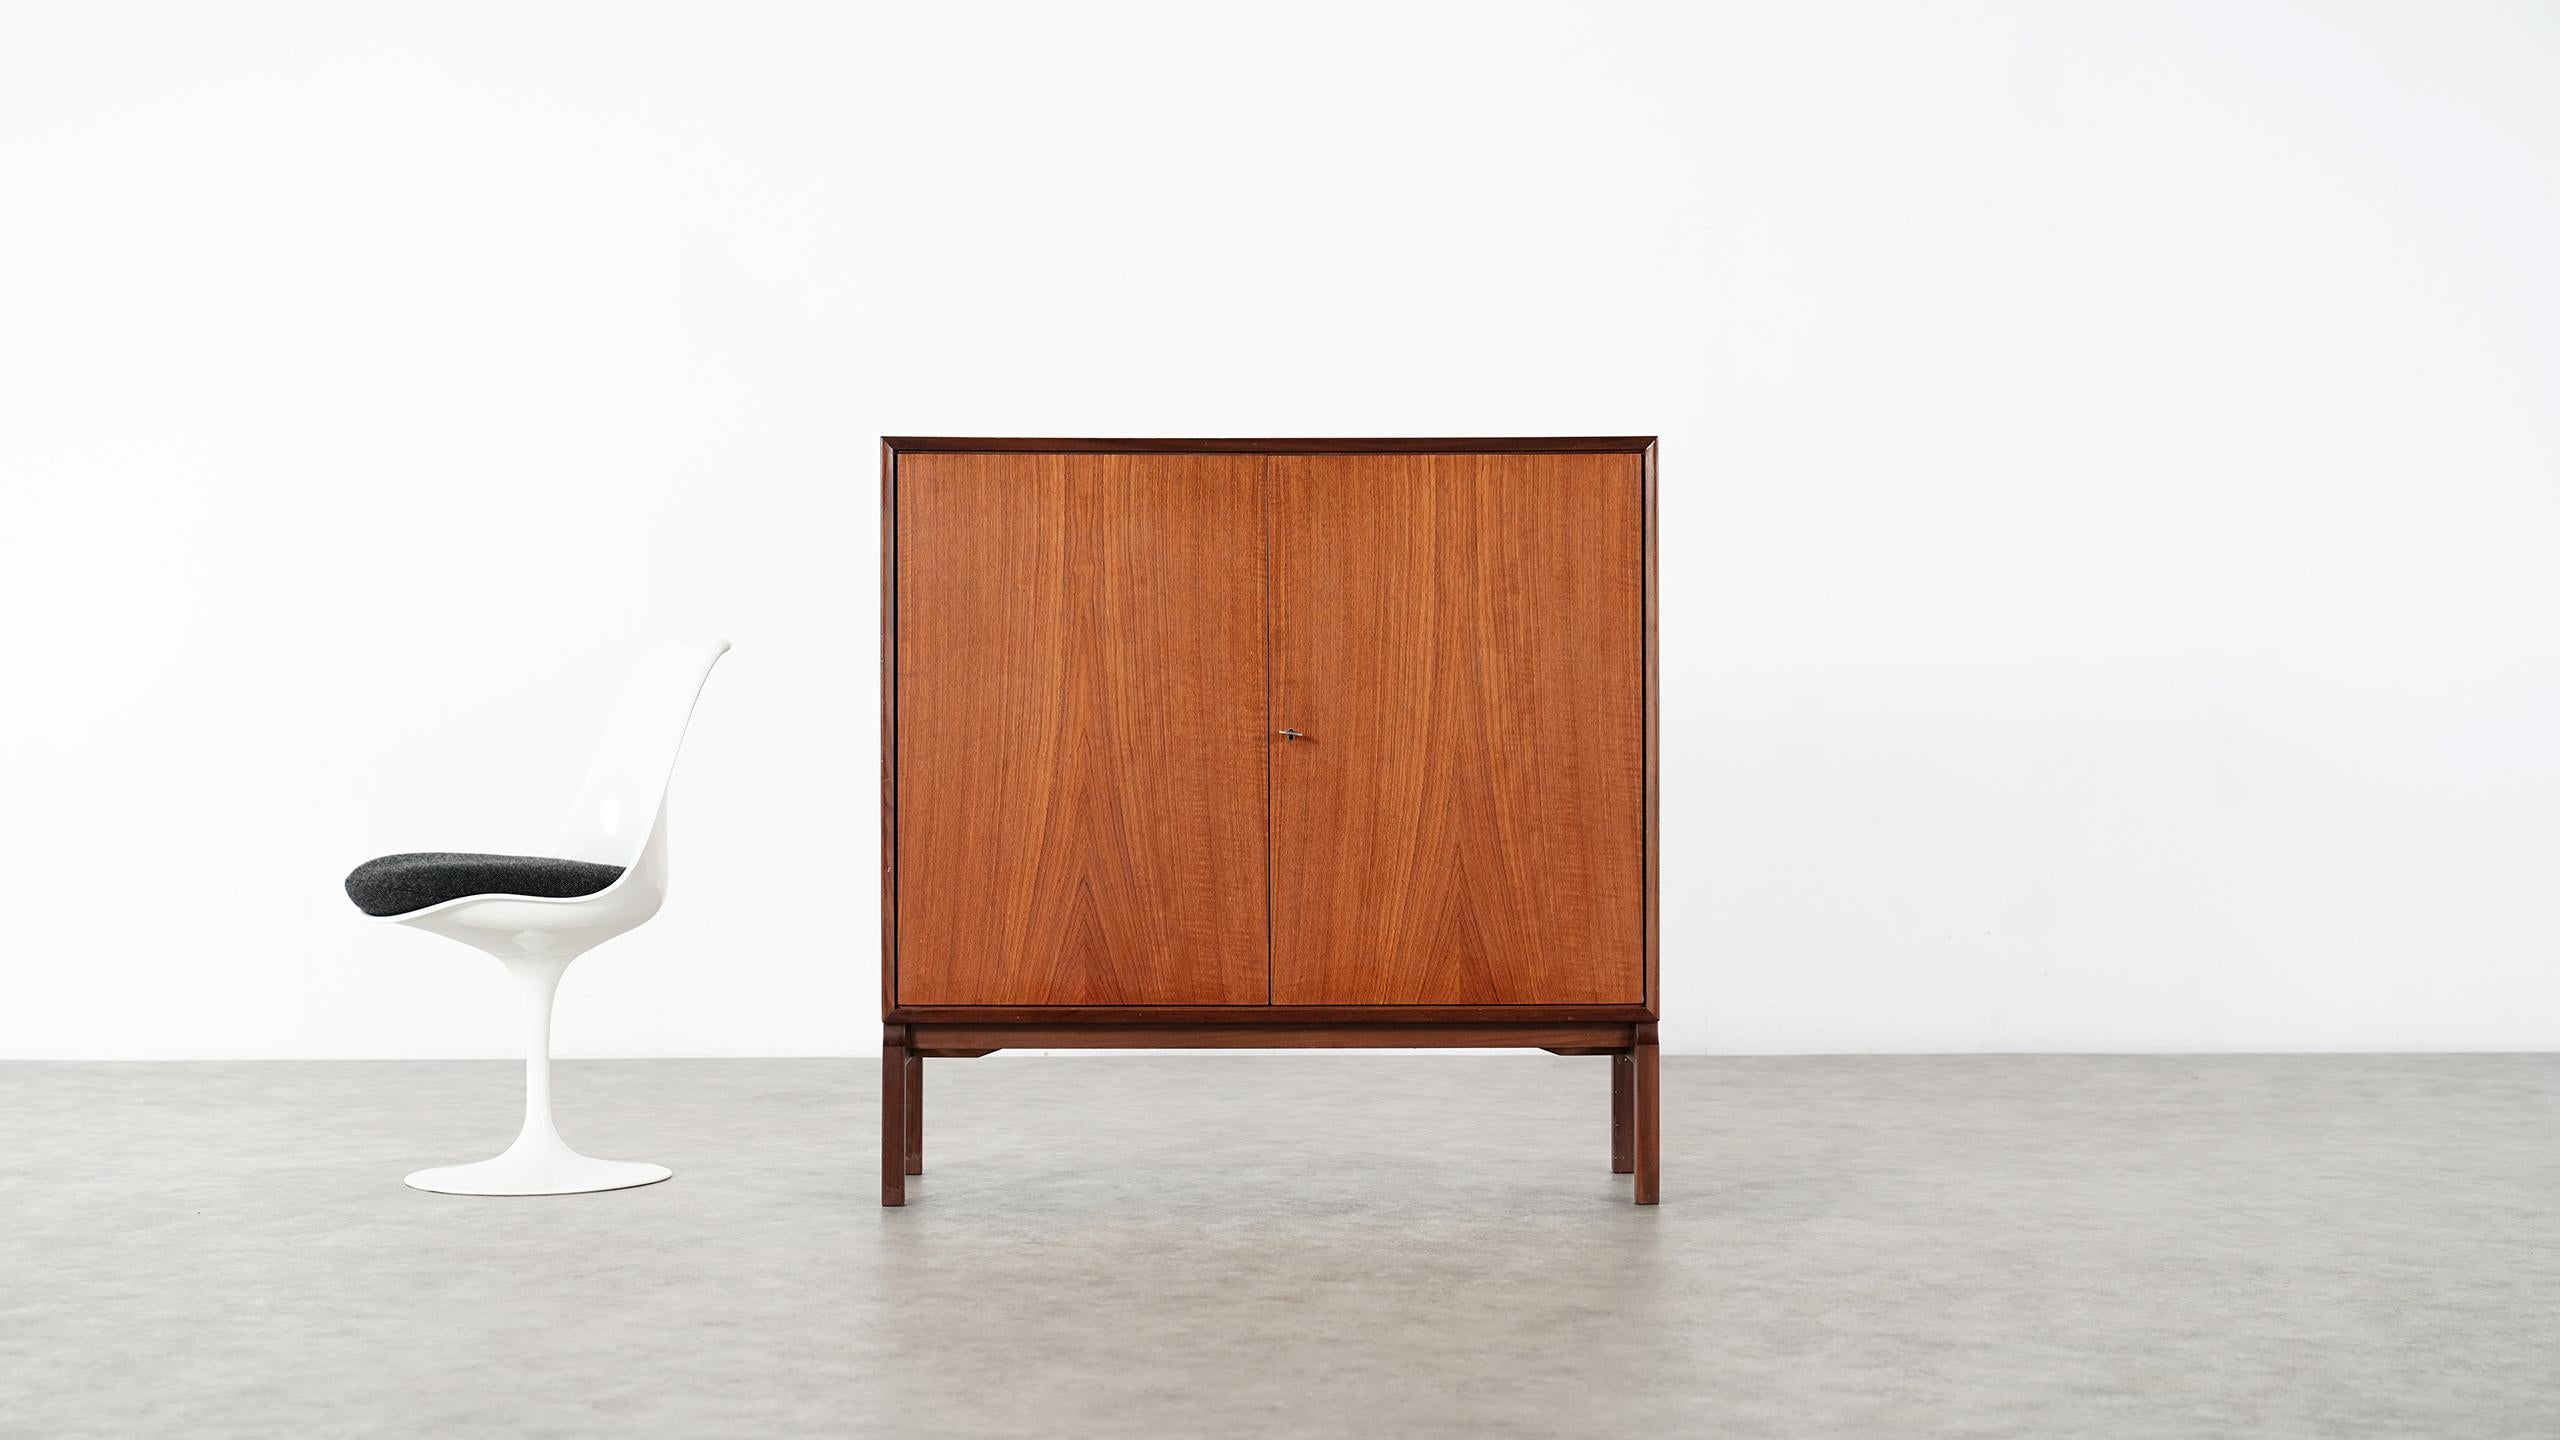 Very elegant and minimalistic teak Highboard from Denmark.

Measures: only 110cm wide, 109cm high and 40cm deep it is nevertheless spacious.
2 teakdoors closing with their original key are hiding 2 Arne Vodder like shaped drawers.

Really nice